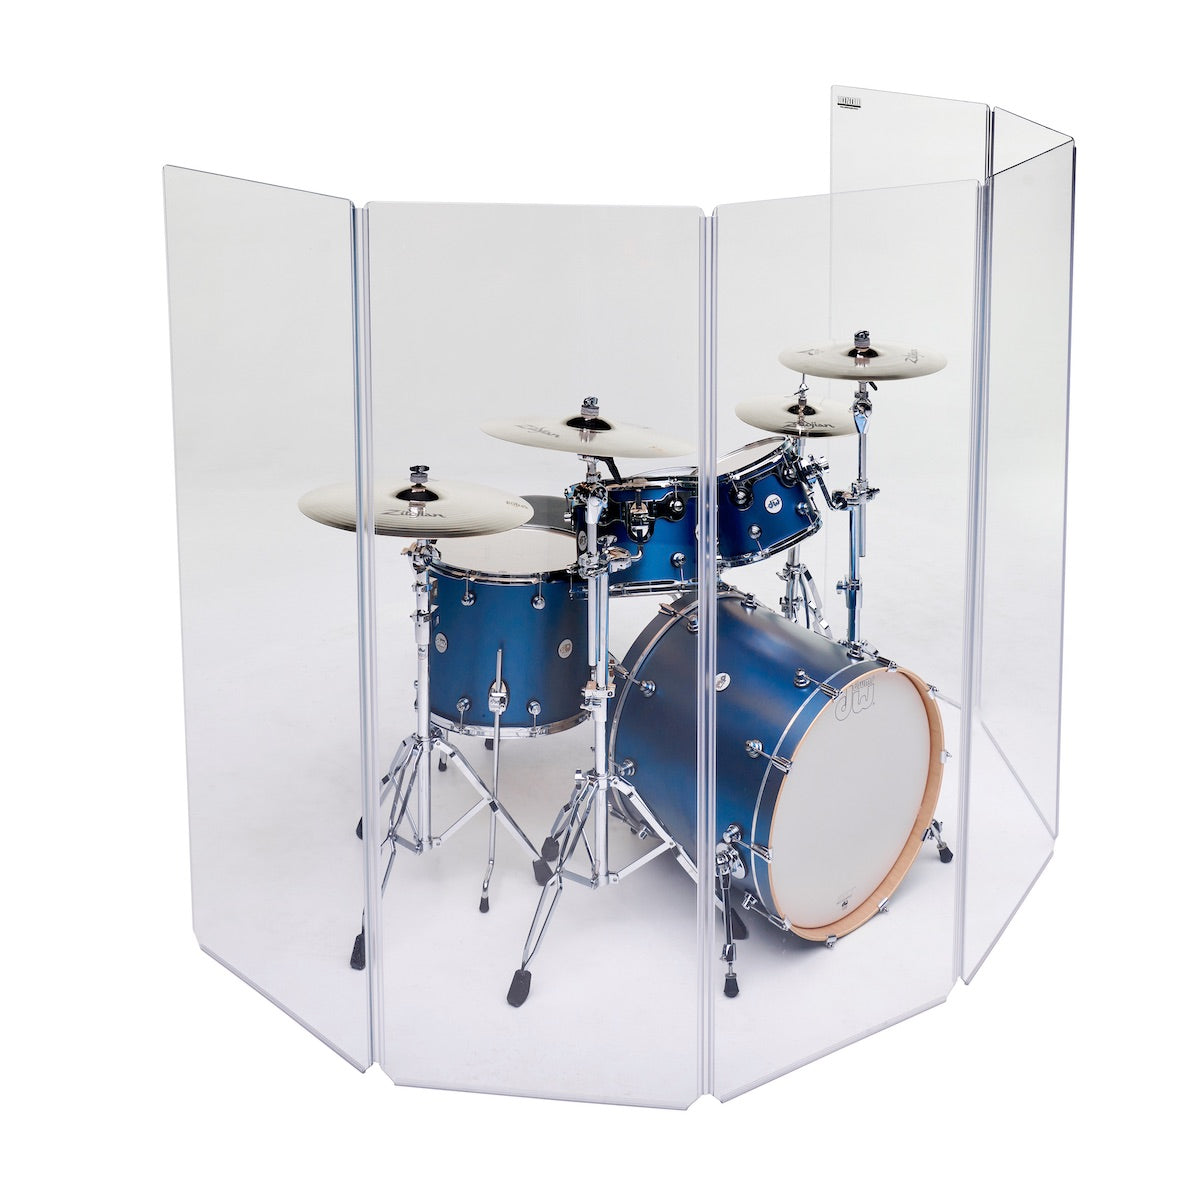 ClearSonic A2466x6 Drum Shield - 6 panel Sound Isolation System, angle